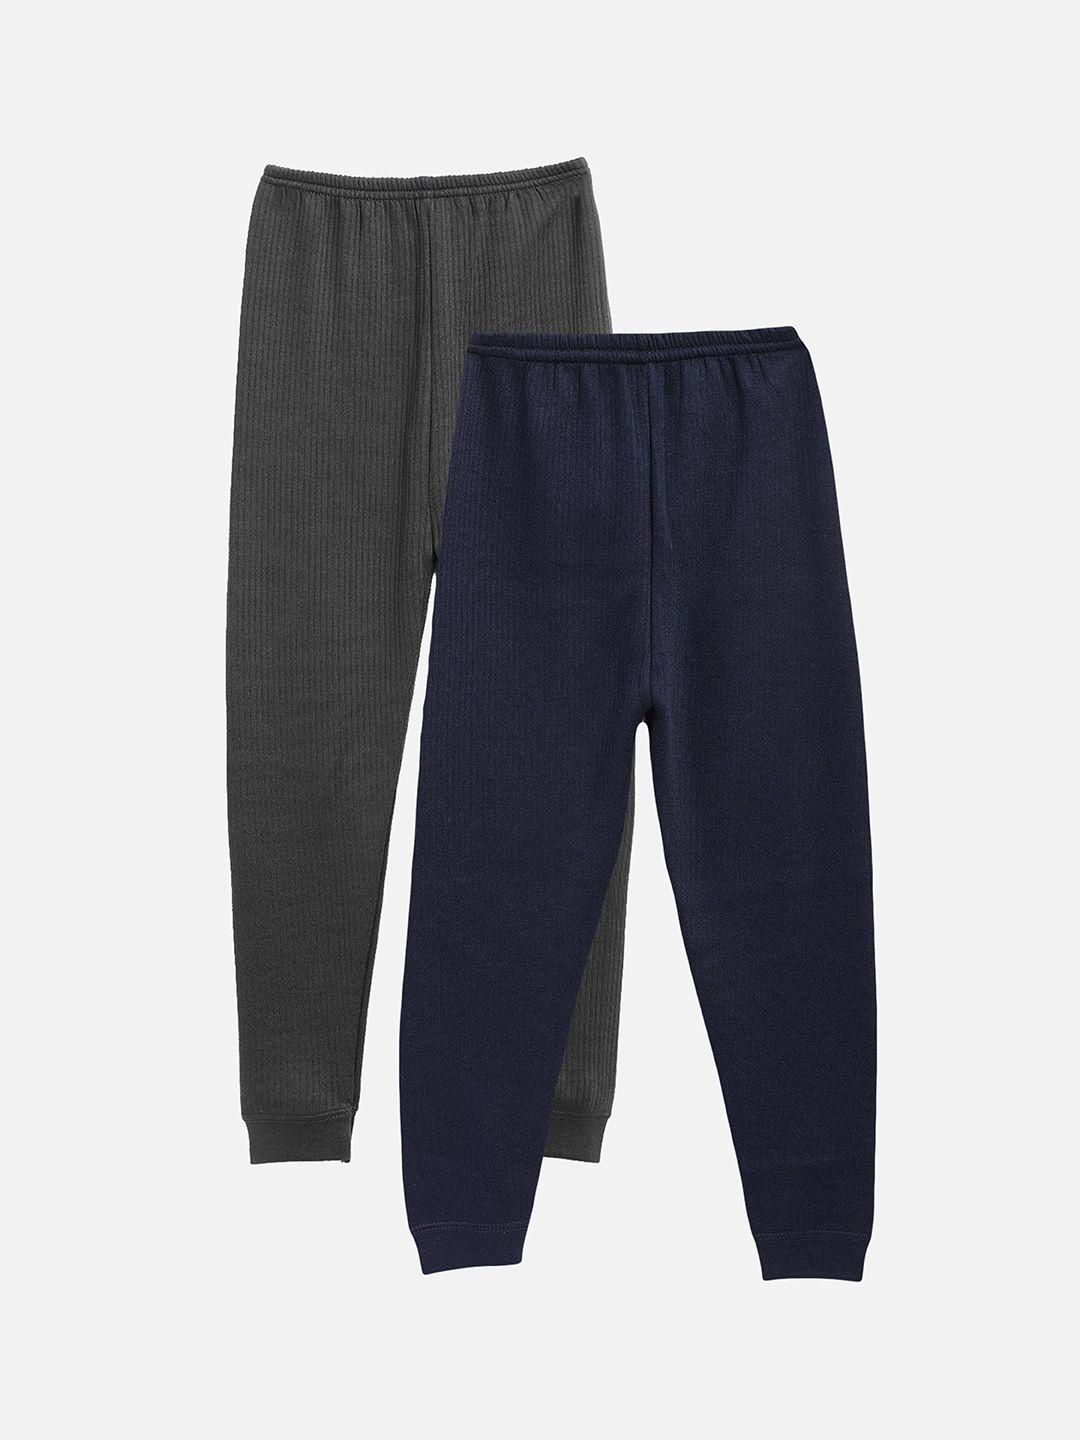 kanvin boys pack of 2 navy blue and charcoal solid thermal bottoms